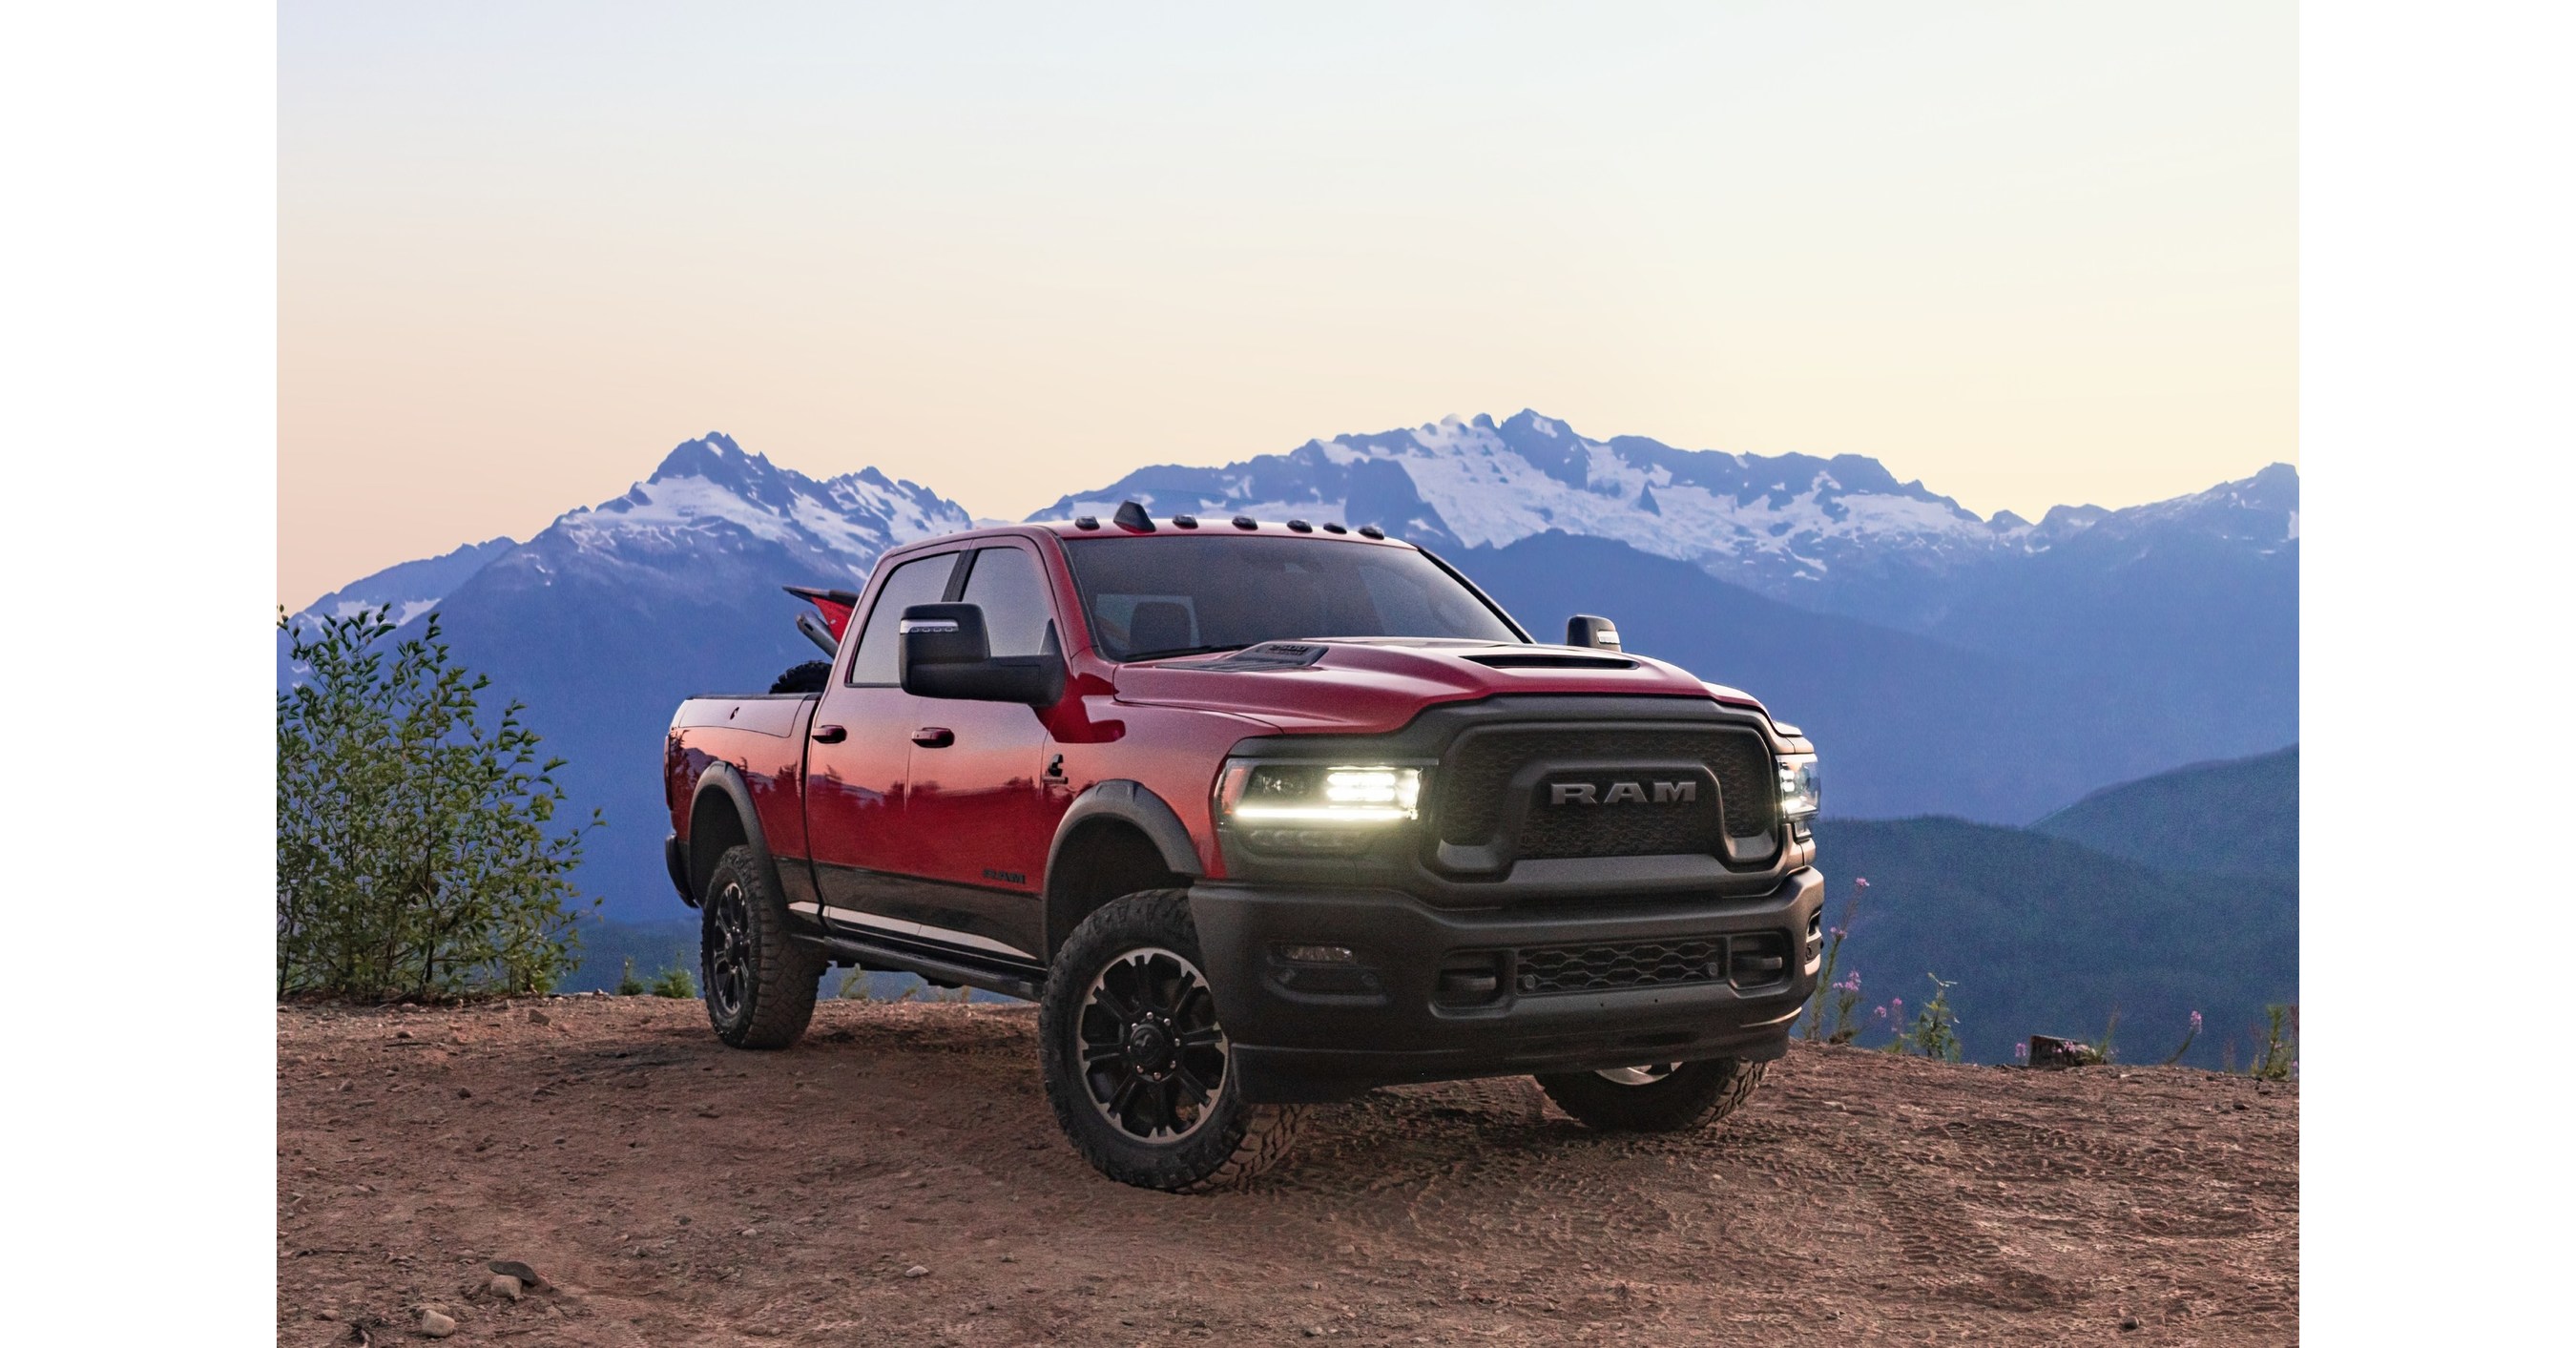 Ithaca brændstof Medicinsk malpractice New 2023 Ram 2500 Heavy Duty Rebel Unveiled at State Fair of Texas With  Exceptional Off-road and Towing Capability: Available With 6.7-liter  Cummins Turbo Diesel Engine